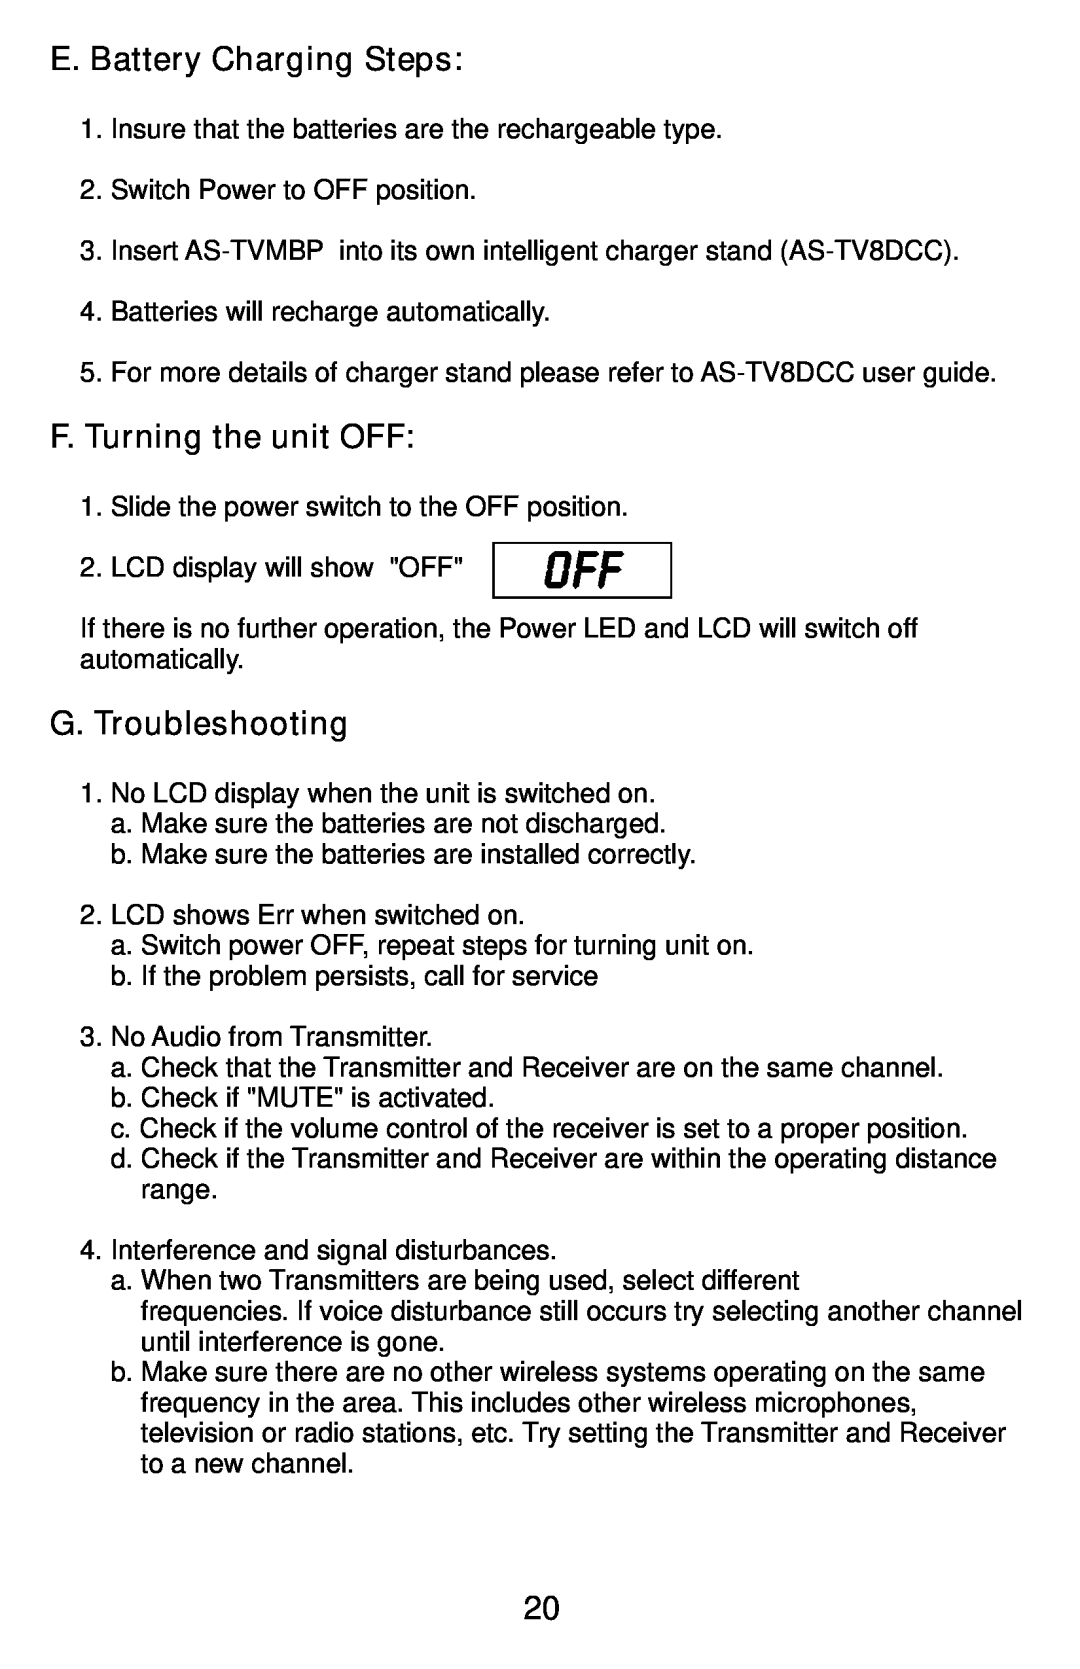 Traveler AS-TV8 manual E. Battery Charging Steps, F.Turning the unit OFF, G.Troubleshooting 